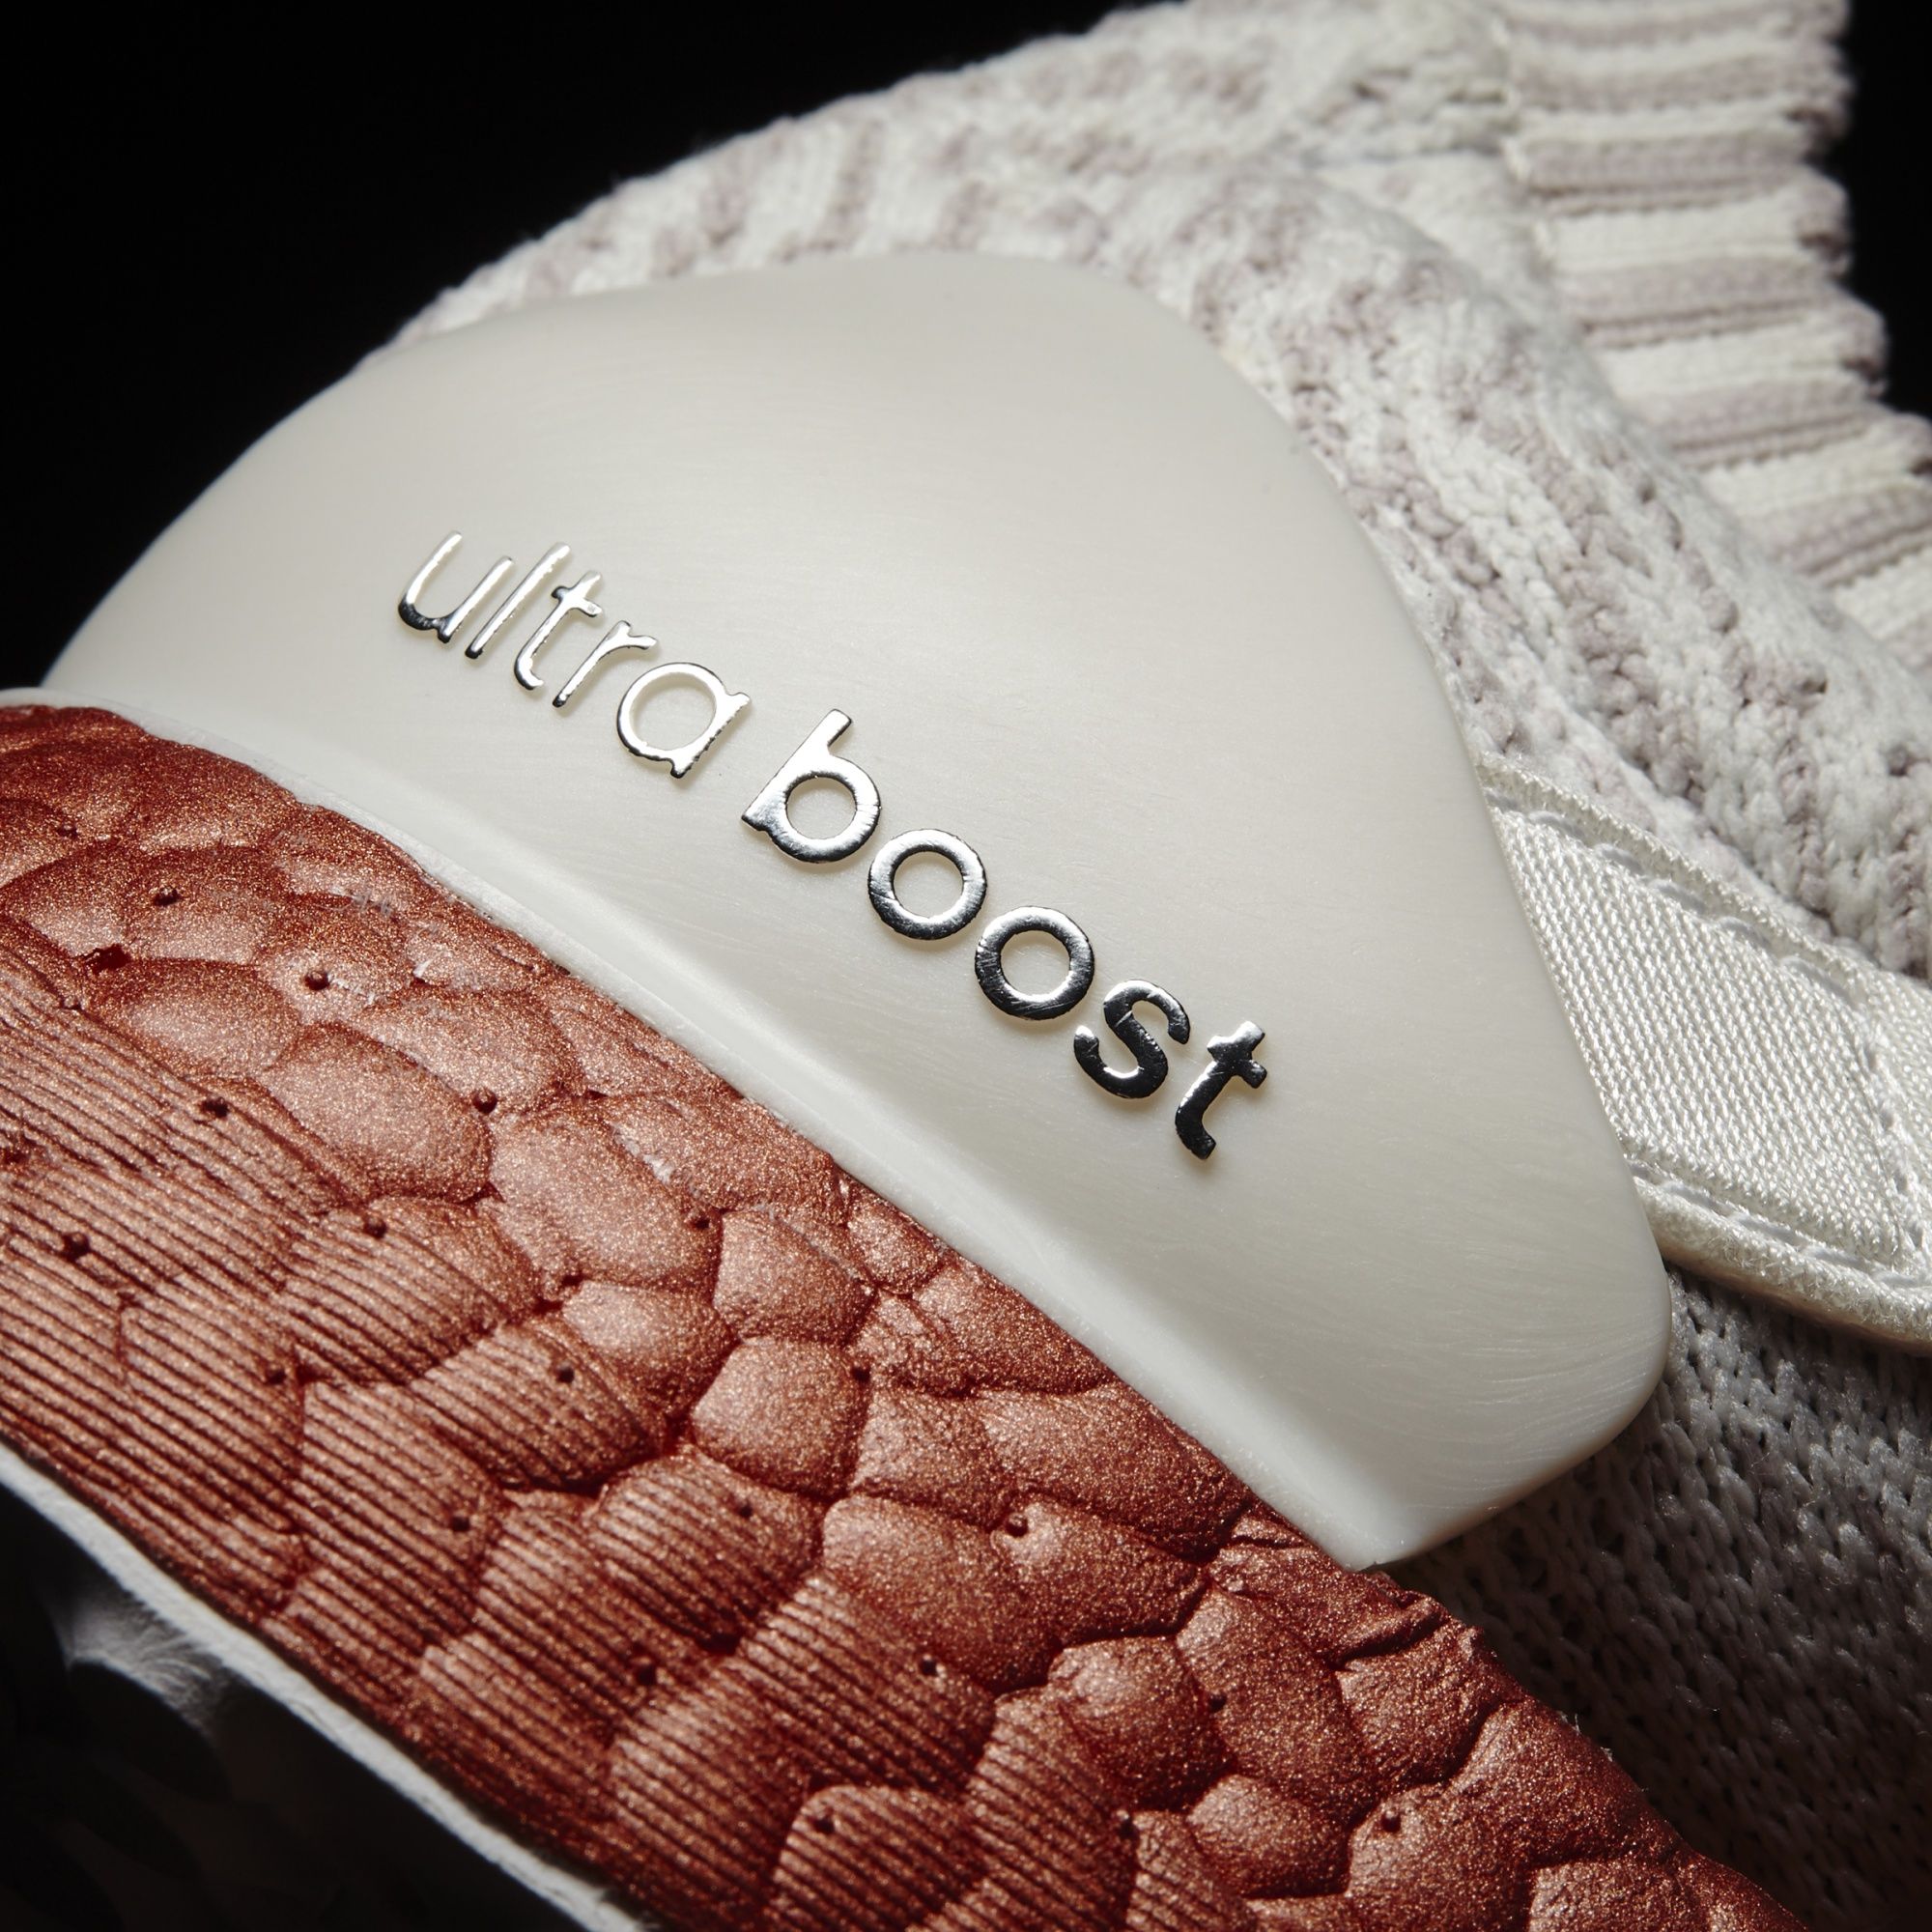 adidas-wmns-ultra-boost-x-limited-edition-crystal-white-5